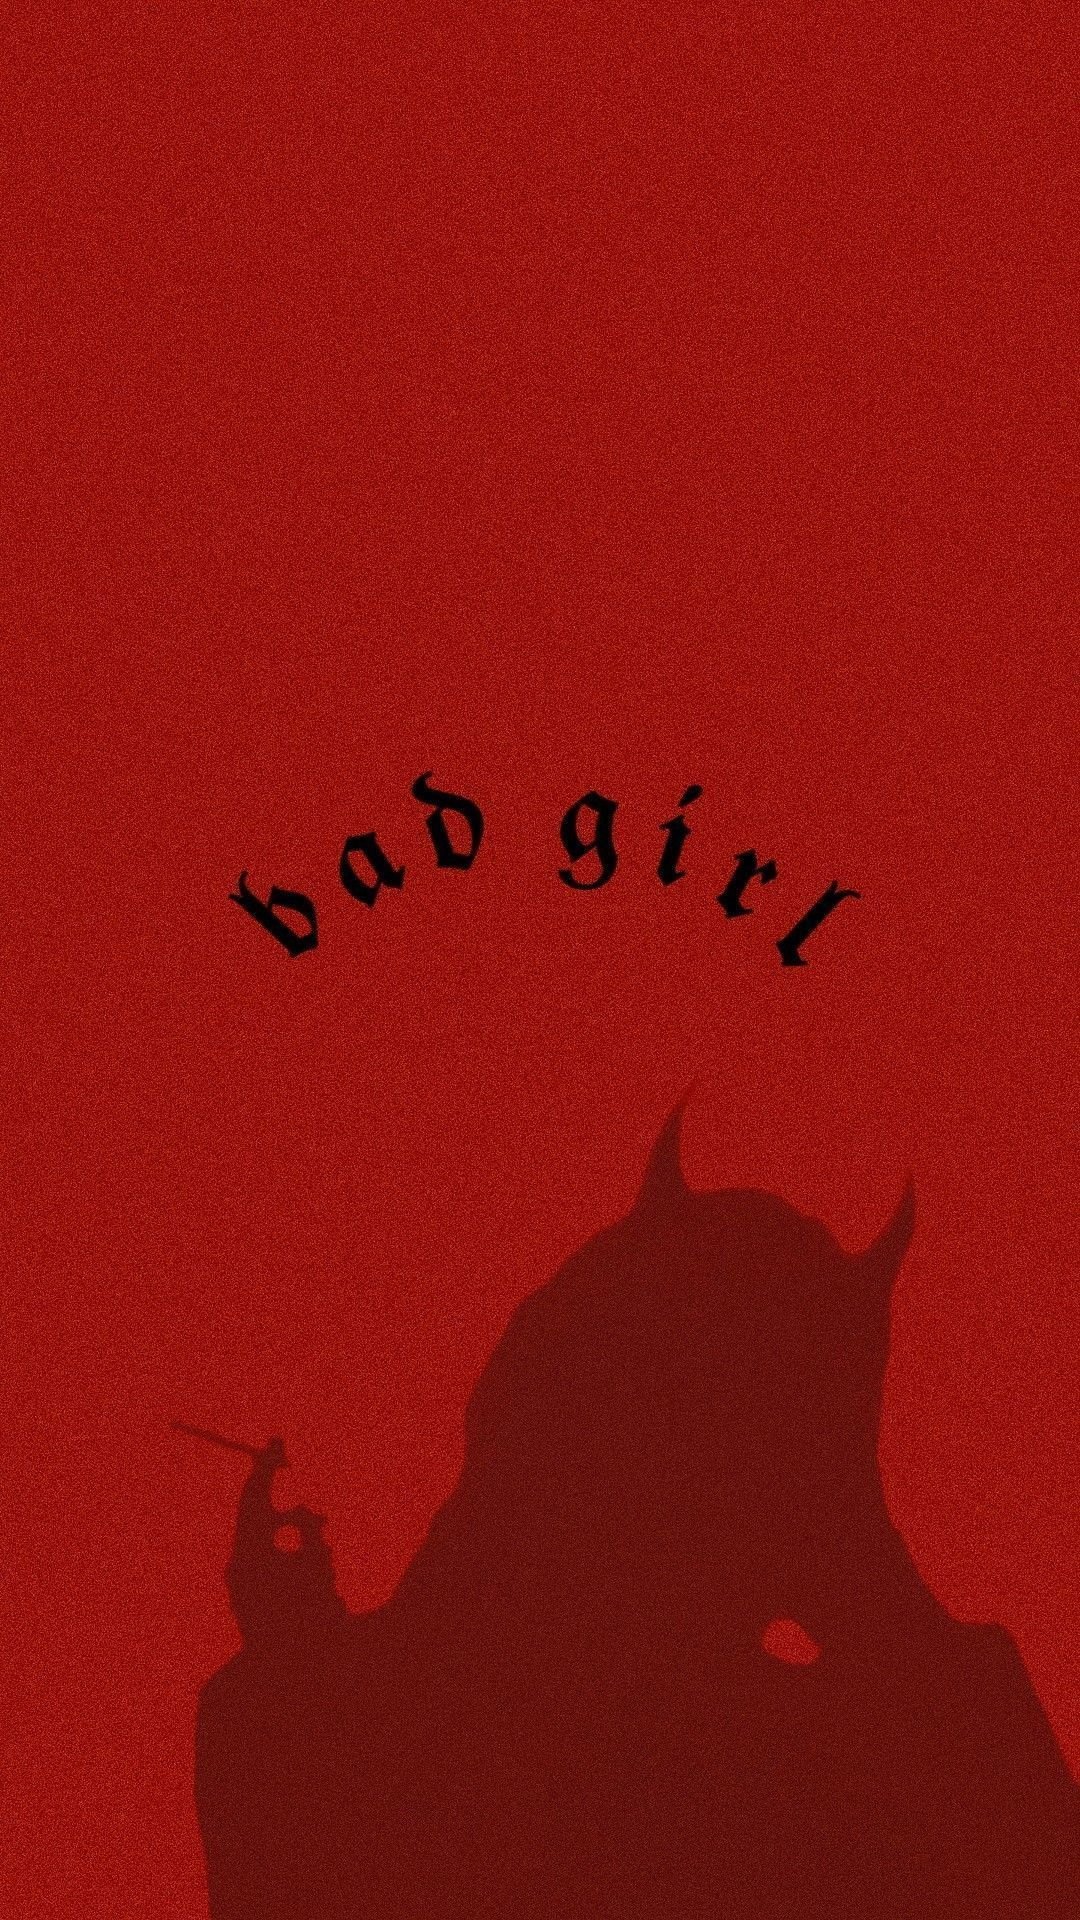 Red background bad girl